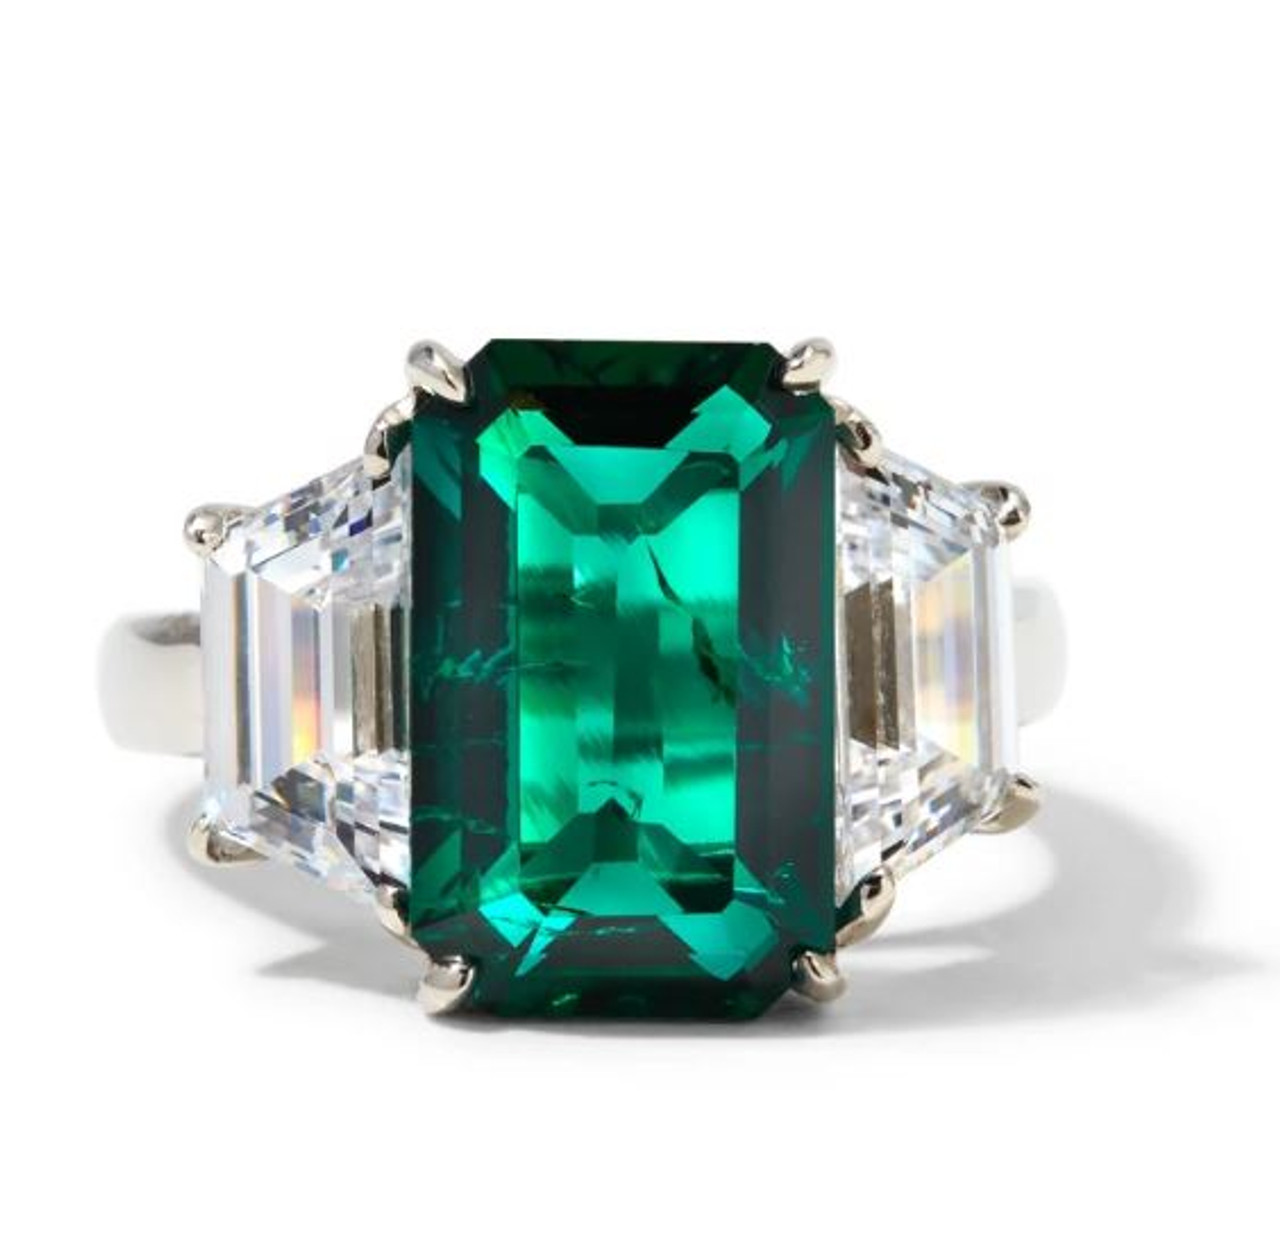 Emerald Center with Trapezoid Side Stones - Fantasia by DeSerio